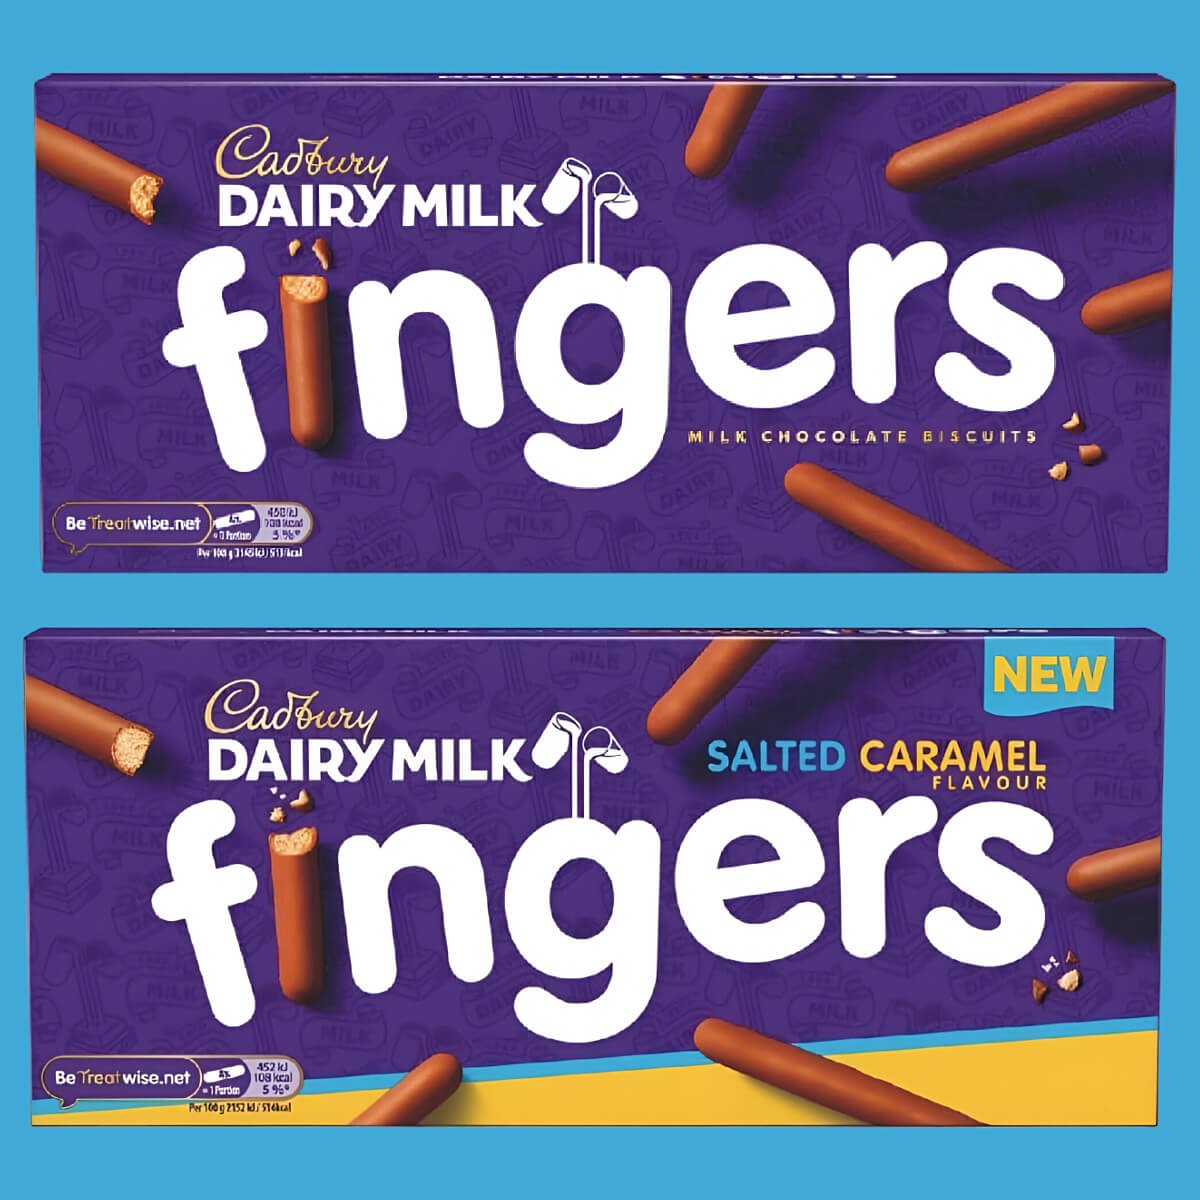 Two boxes of Cadbury Dairy Milk Chocolate Fingers inc. Salted Caramel Fingers.